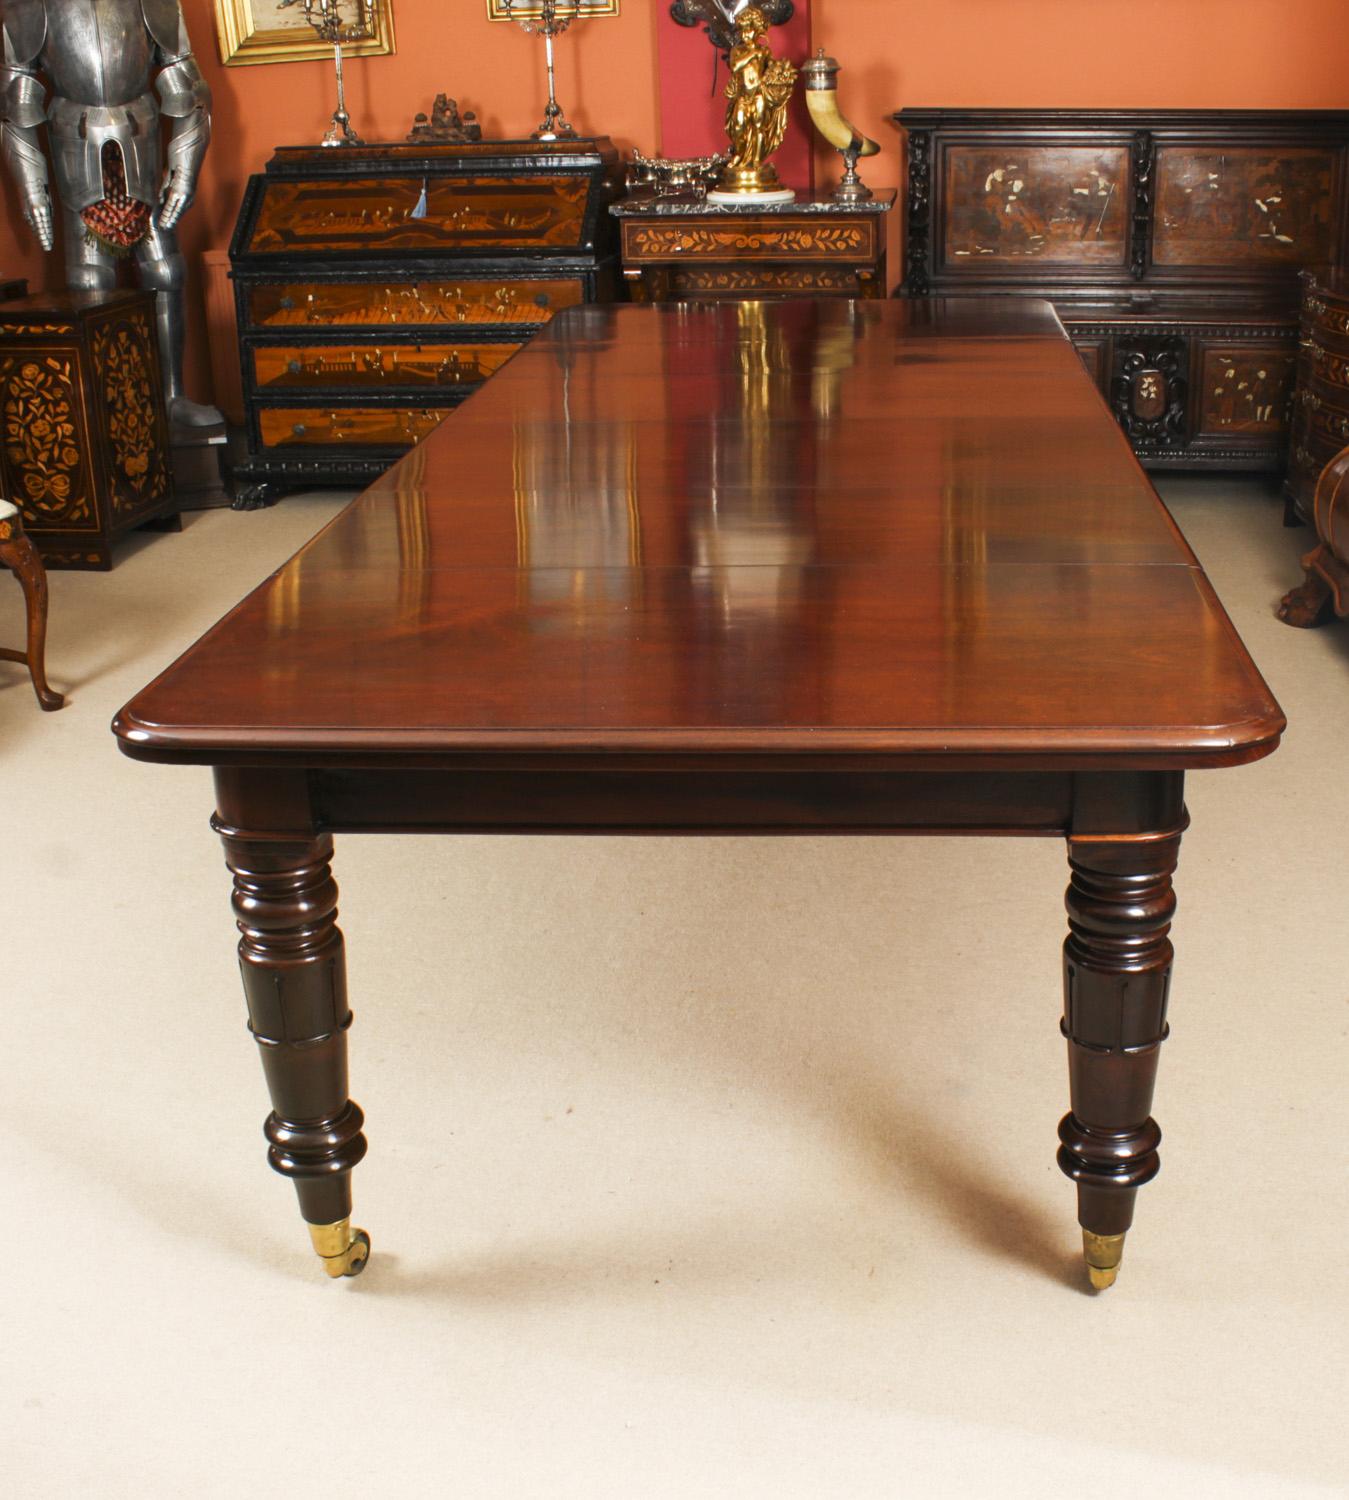 This is a superb antique William IV flame mahogany dining table, Circa 1830 in date.

This amazing table can seat ten people in comfort and has been hand-crafted from solid mahogany.

The beautifully figured flame mahogany top table has four